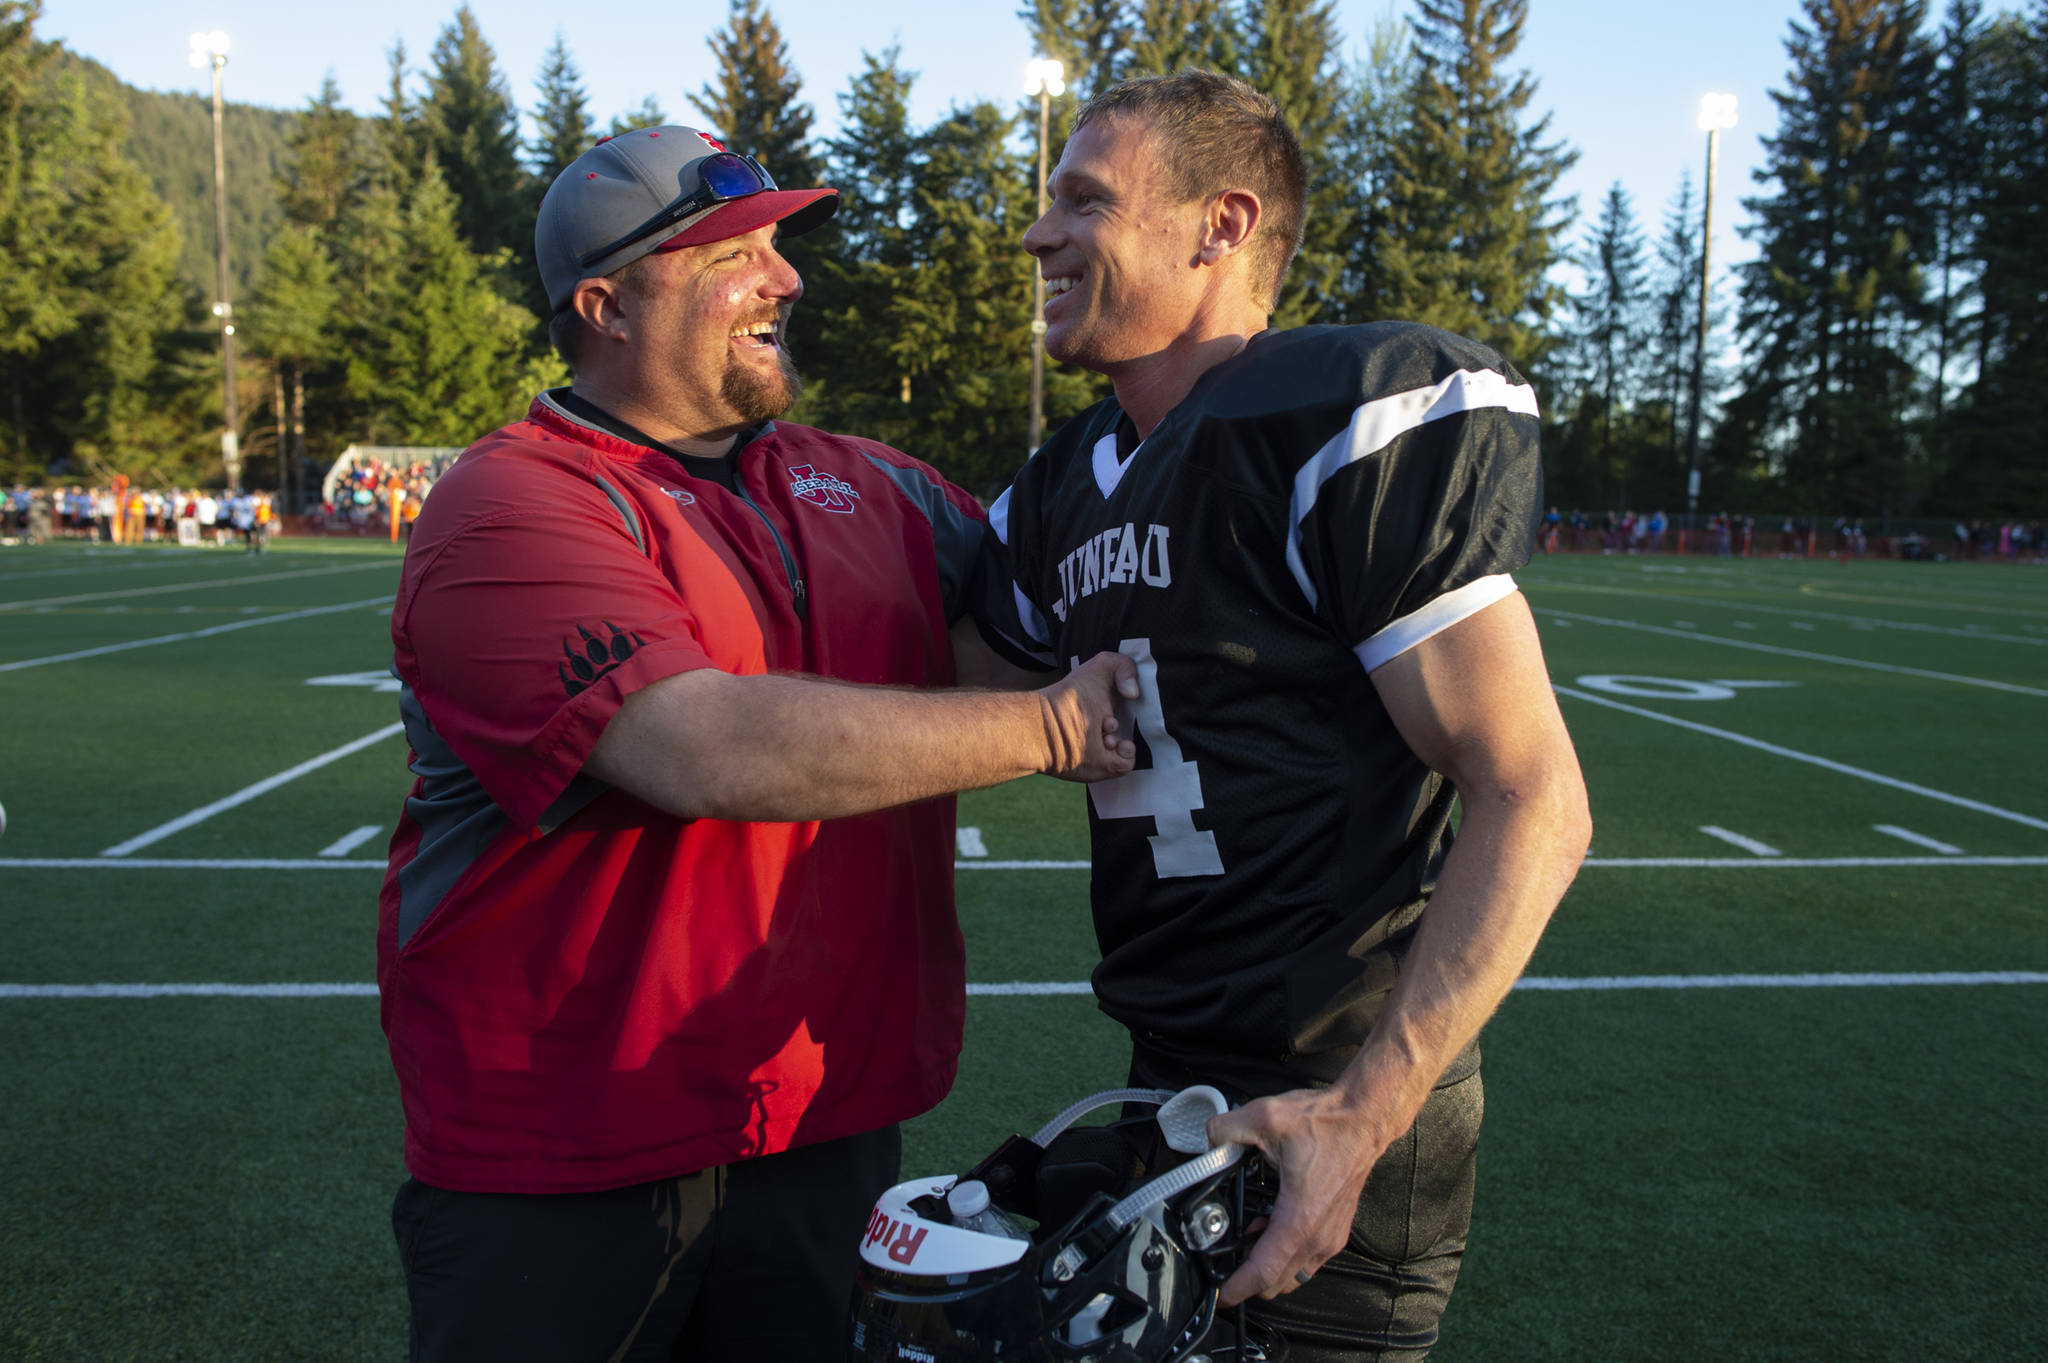 Chad Bentz congratulates Legends’ Josh Dean on his touchdown during the Juneau Alumni Football Game with football players, dance team members and cheerleaders from Juneau-Douglas and Thunder Mountain High Schools at Adair-Kennedy Memorial Field on Friday, May 24, 2019. (Michael Penn | Juneau Empire)